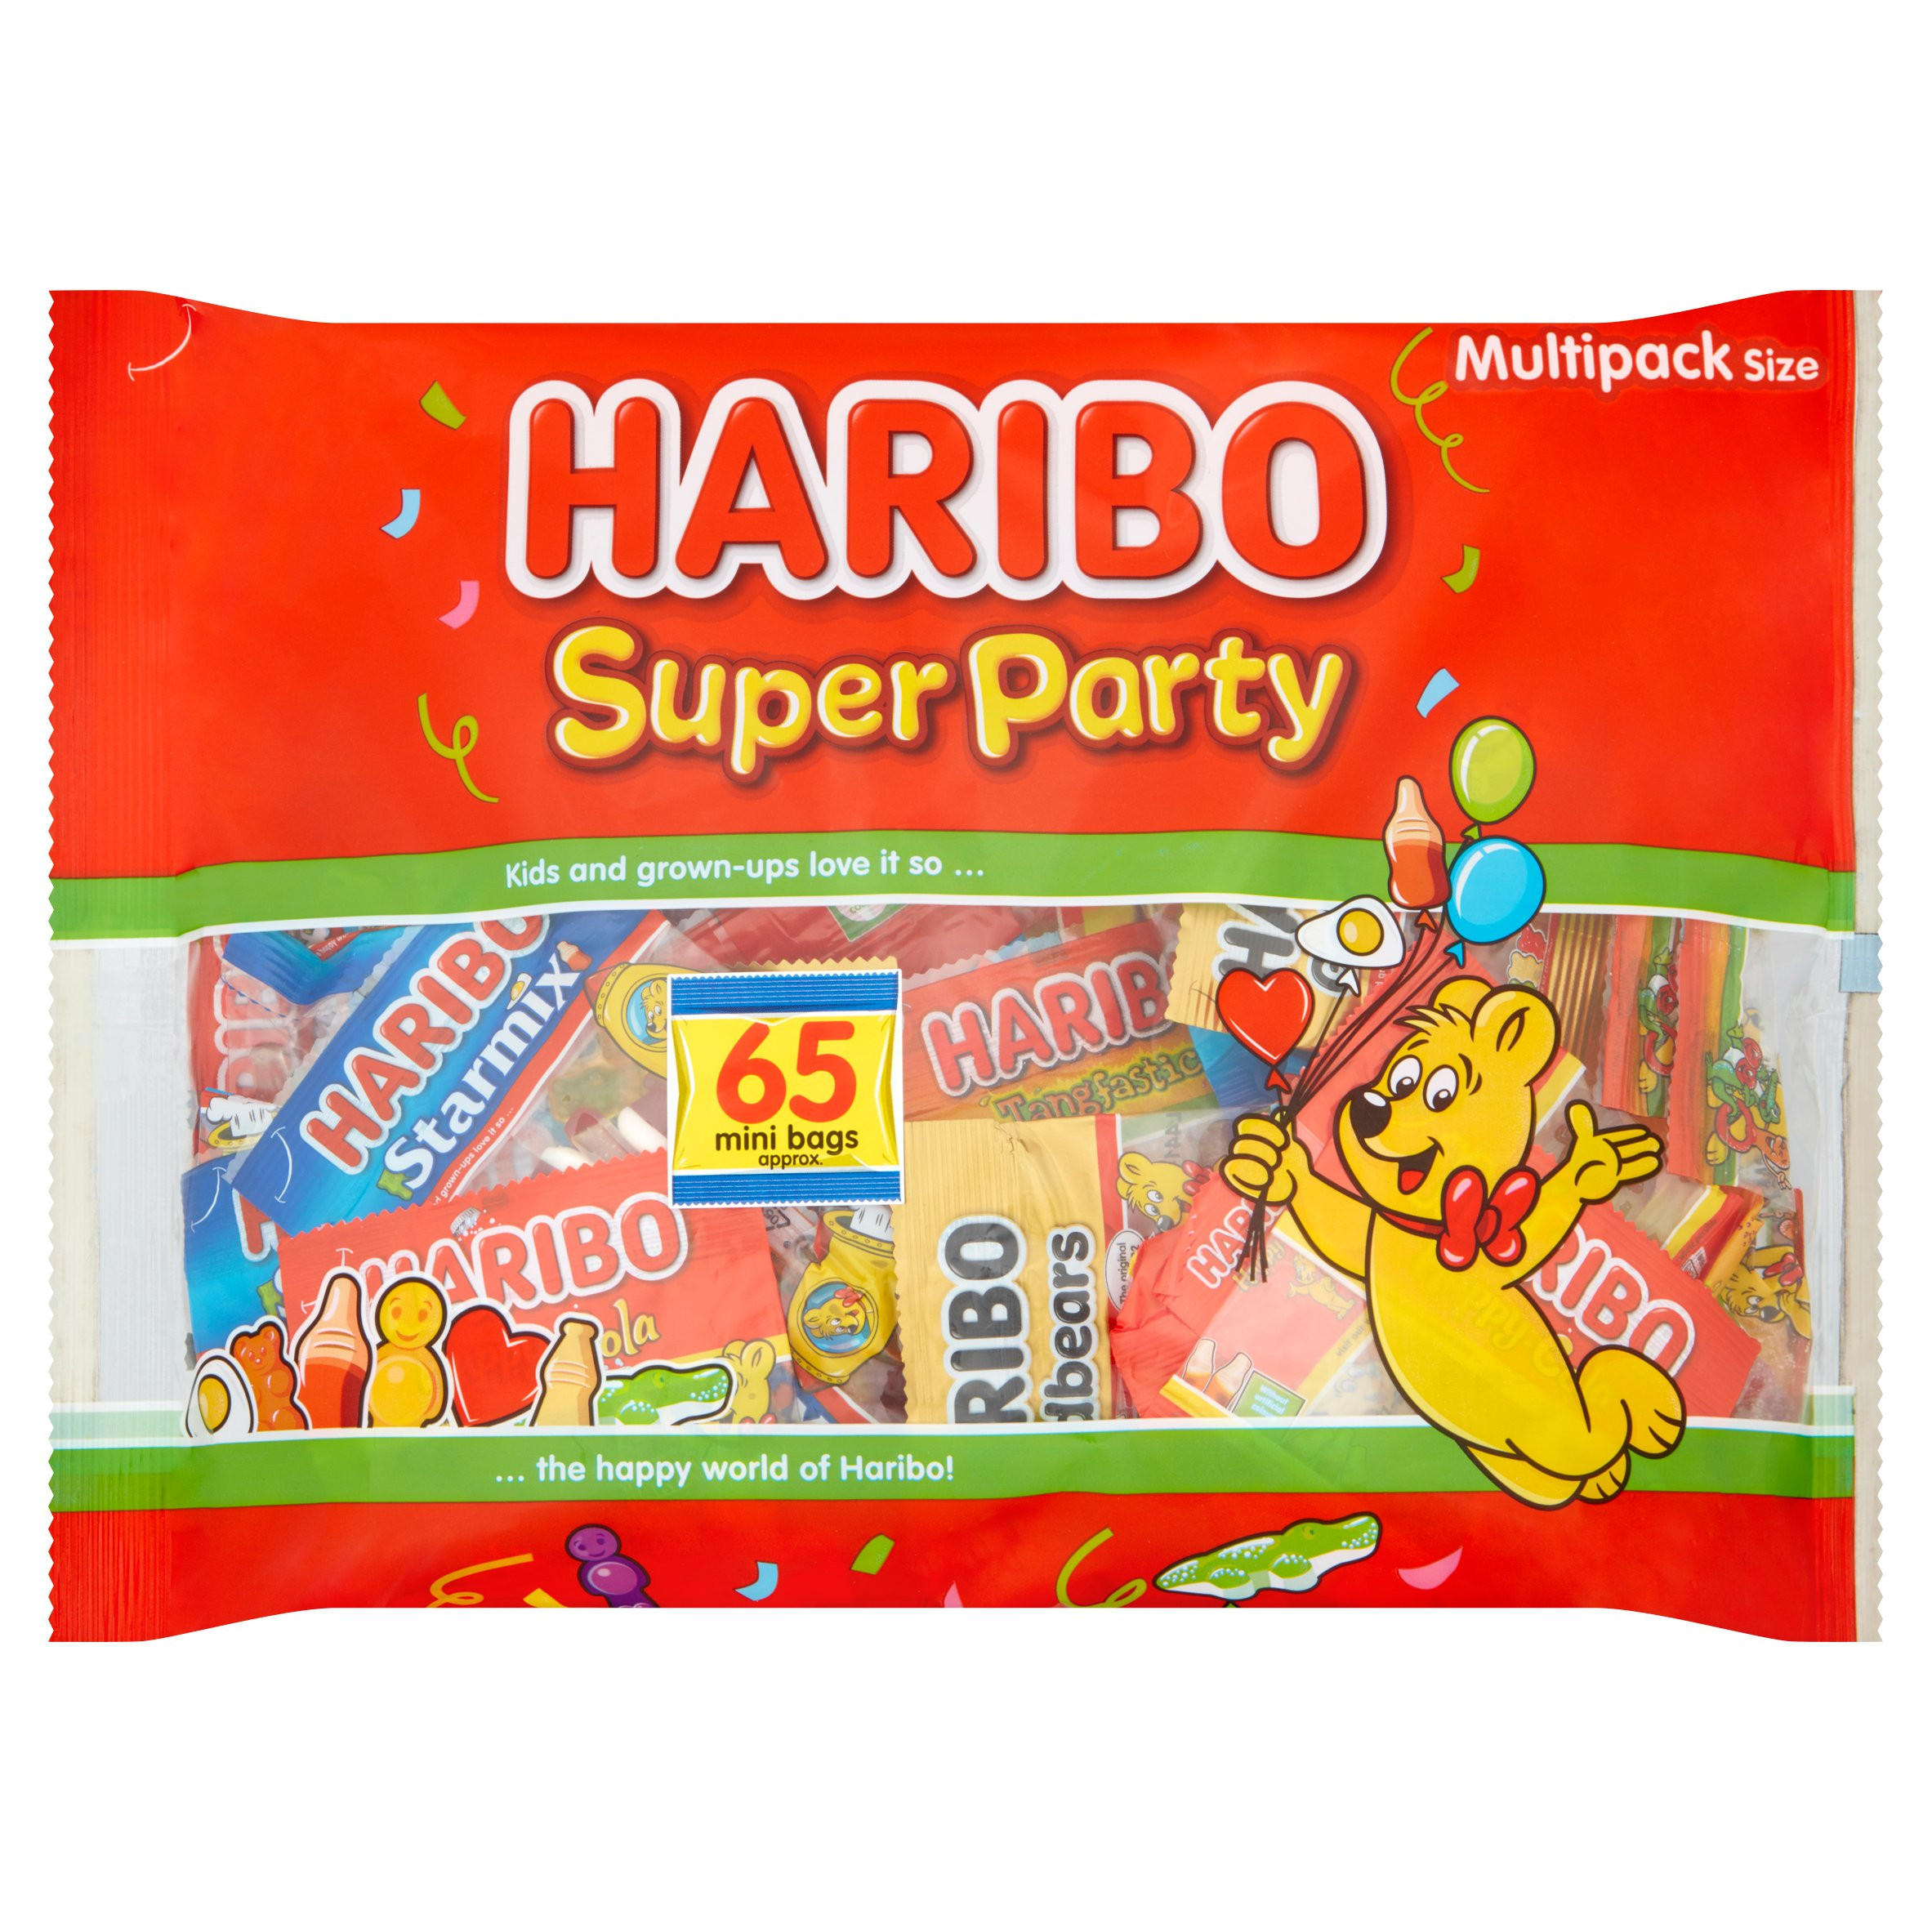 HARIBO Super Party Multipack 1040g | Sweets | Iceland Foods